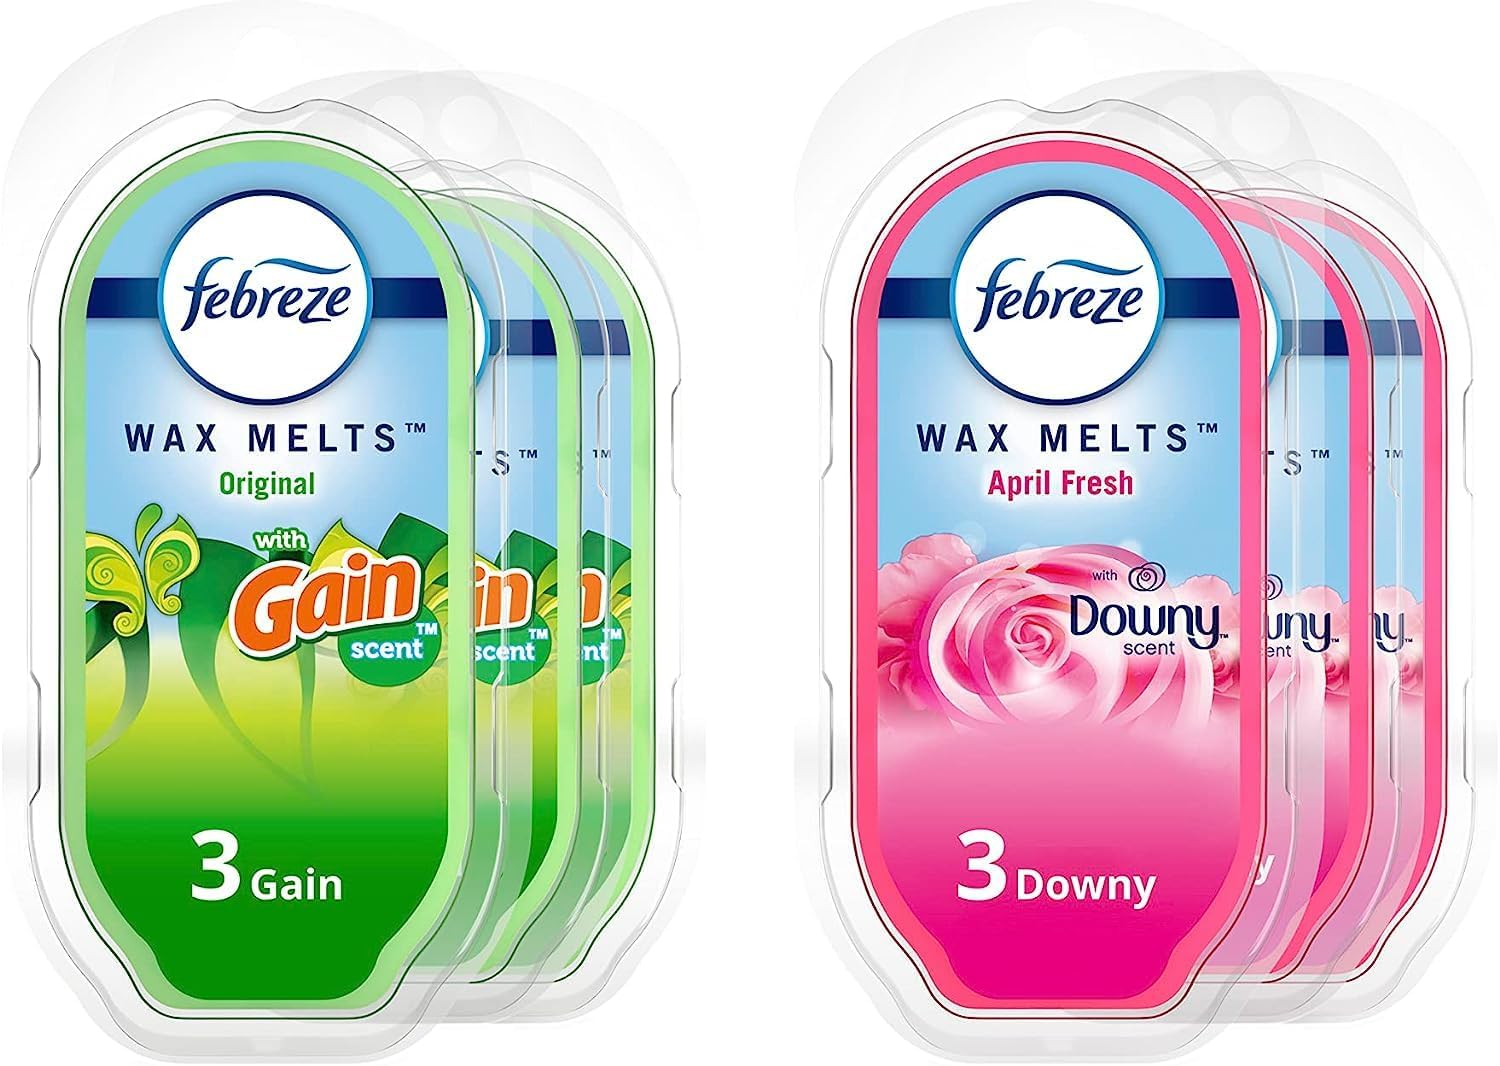 Forget constantly replacing weak wax melts! Febreze melts are incredibly strong - just 1-2 cubes can fragrance your home for a few days. While some reviewers find the initial scent overwhelming, I see it as a major plus. You don't need to keep the warmer on for hours, and the fragrance lingers pleasantly.The variety pack is perfect, offering both clean and slightly sweeter scents. My house constantly smells amazing, and visitors always comment on it! Febreze melts are a game-changer - skip the w